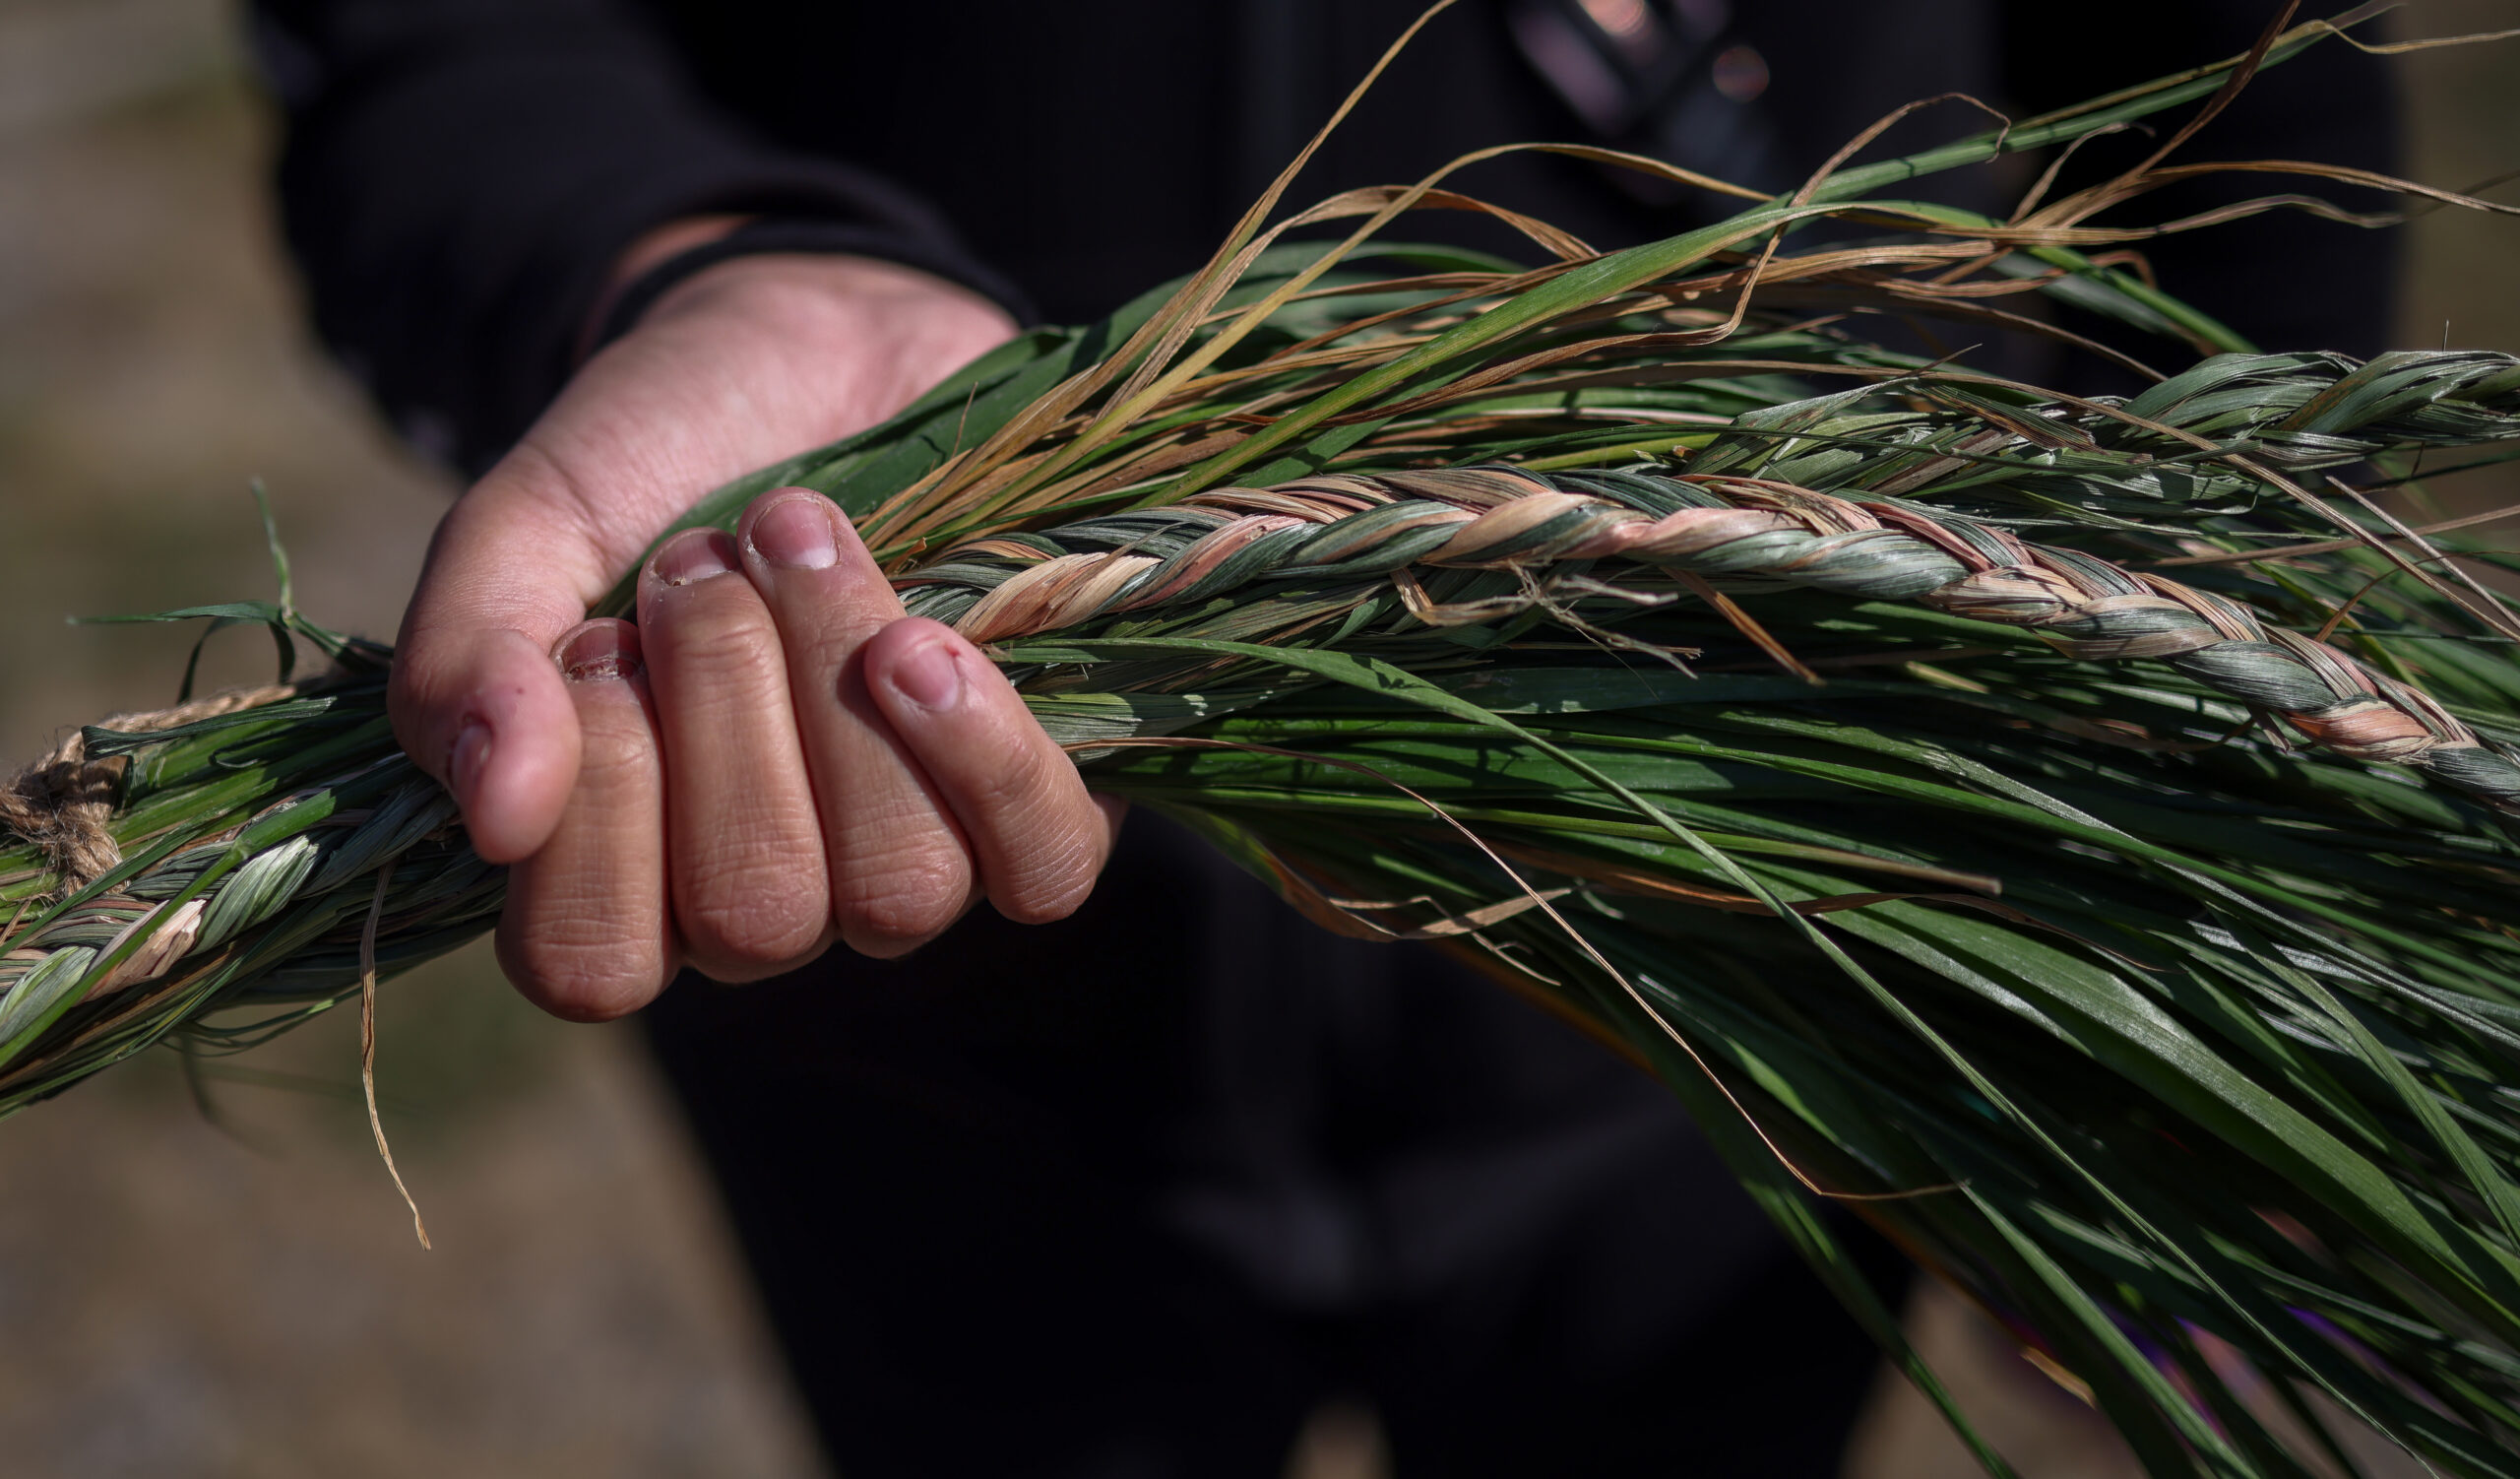 Can sweetgrass sequester carbon? Piikani Nation plans to find out